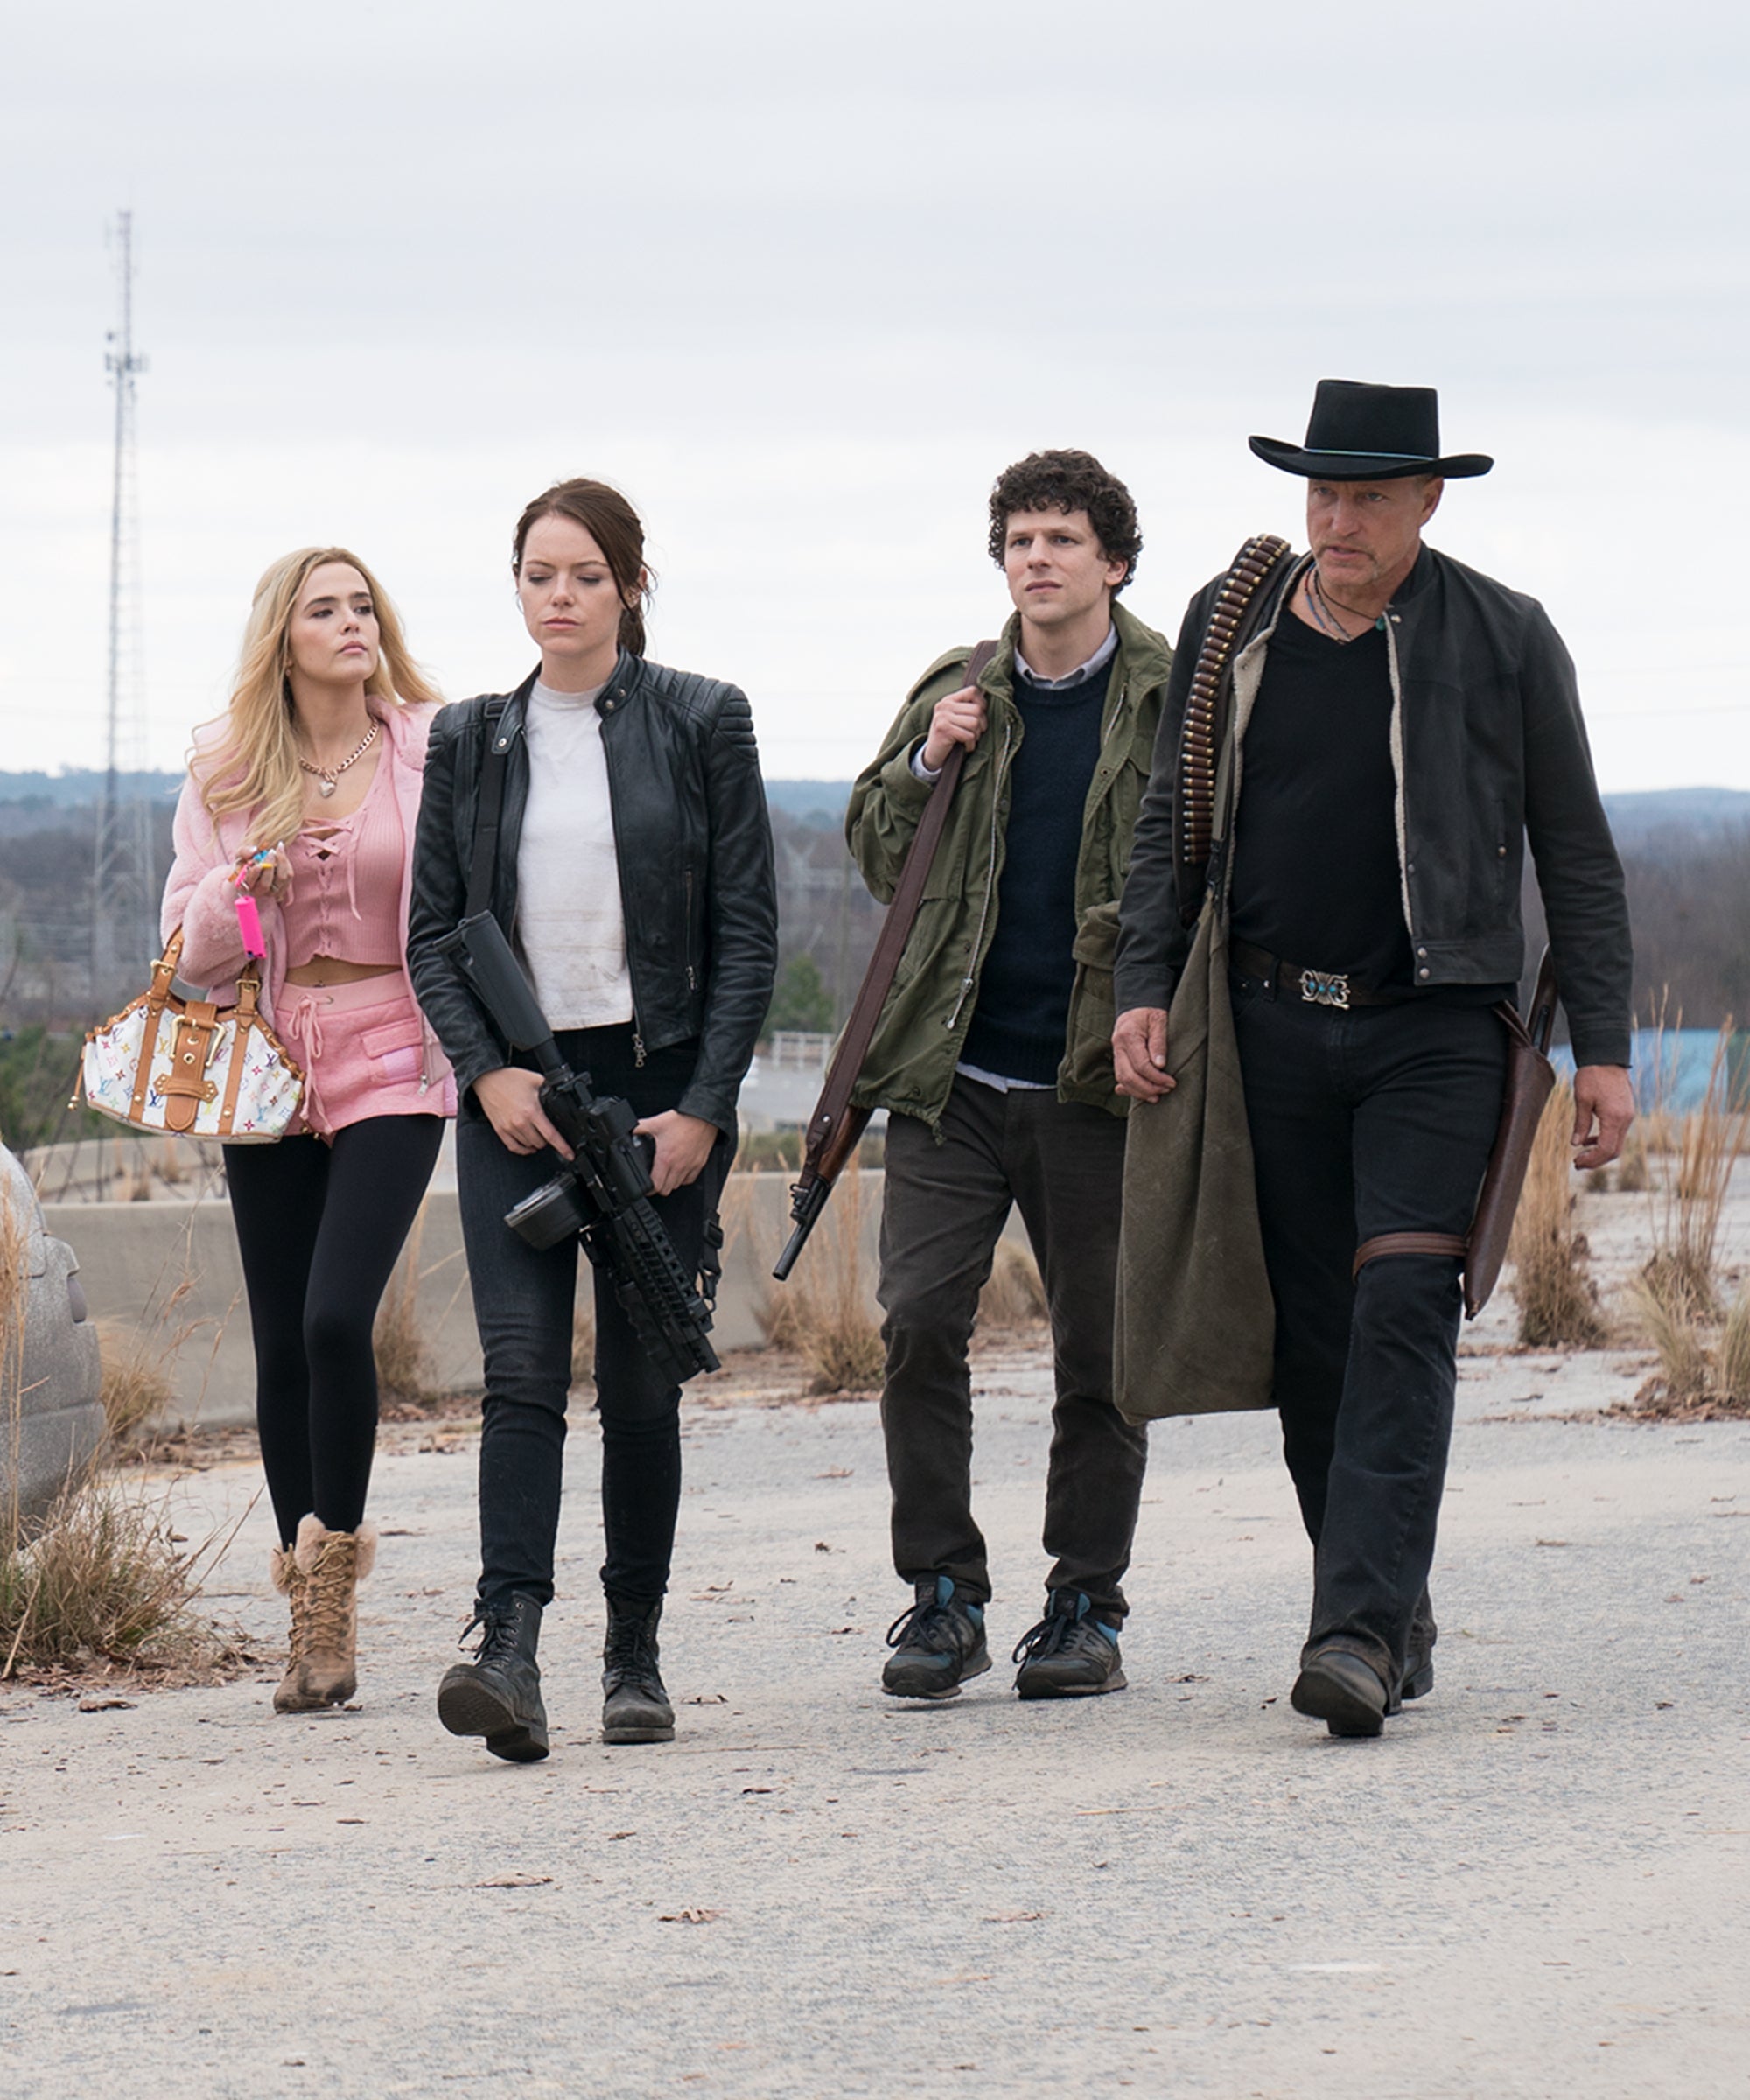 Zombieland Review